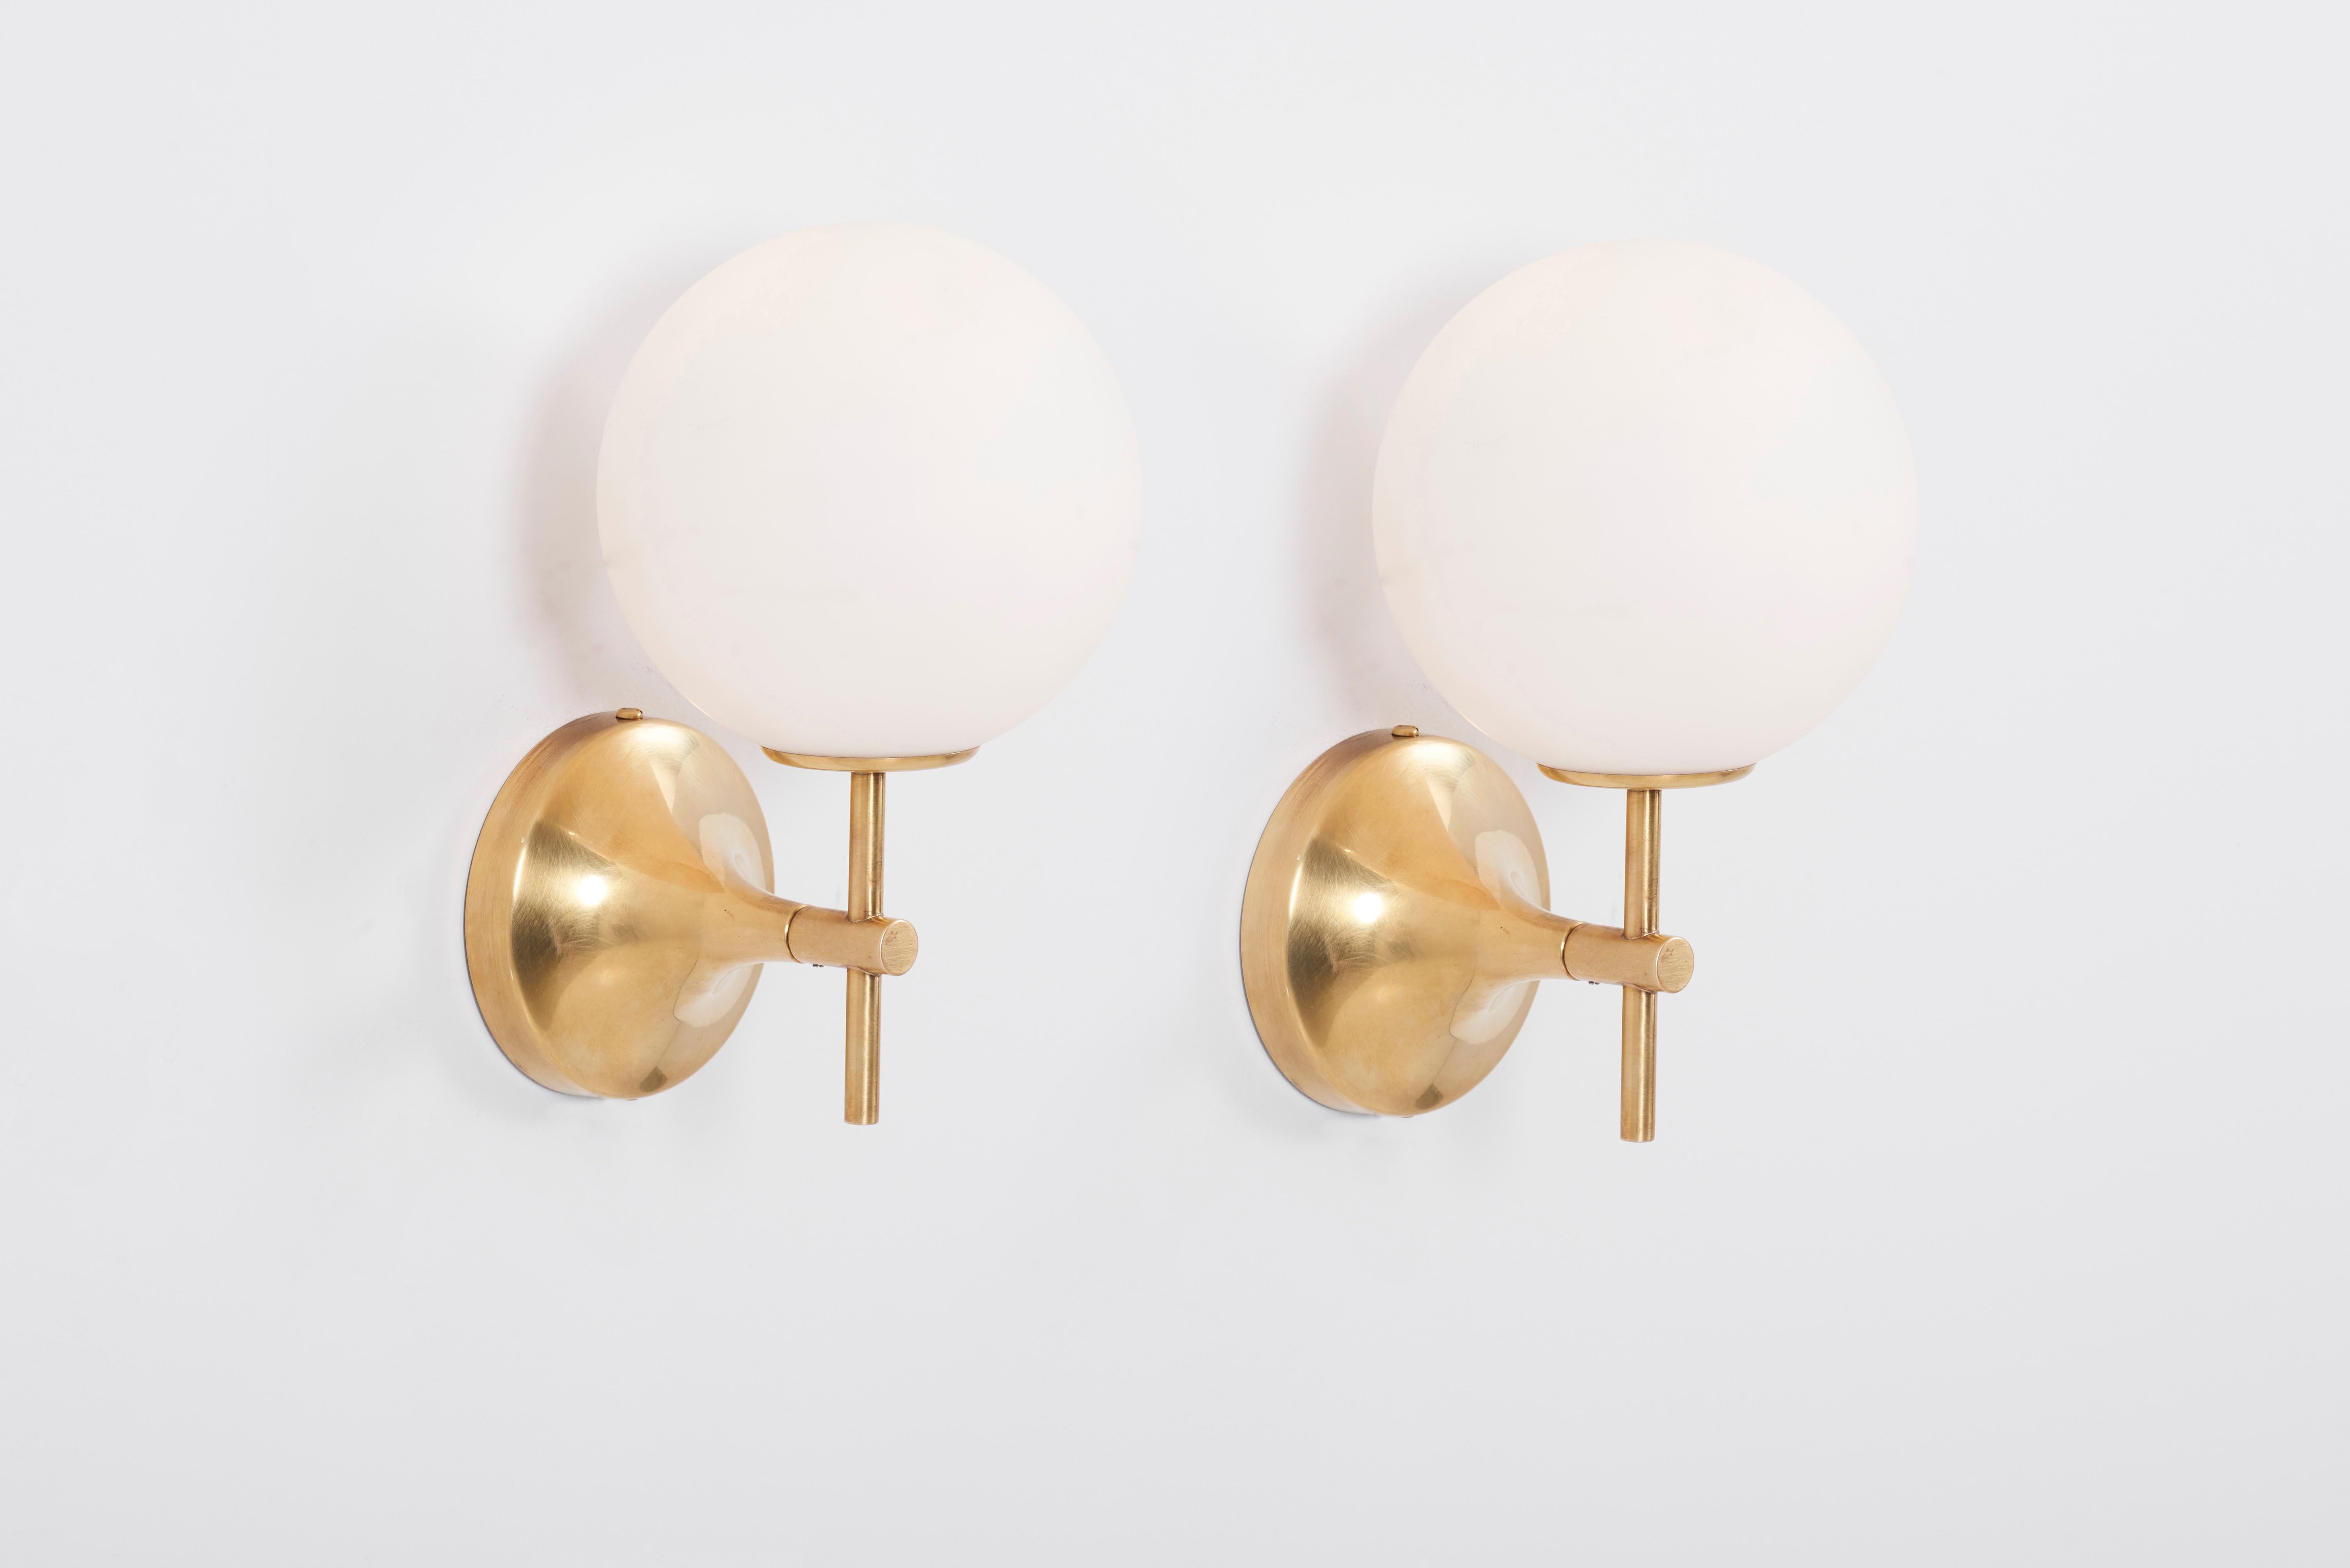 Pair of Wall Lights or Sconces by Max Bill for Temde Leuchten, Swiss, 1960s 1